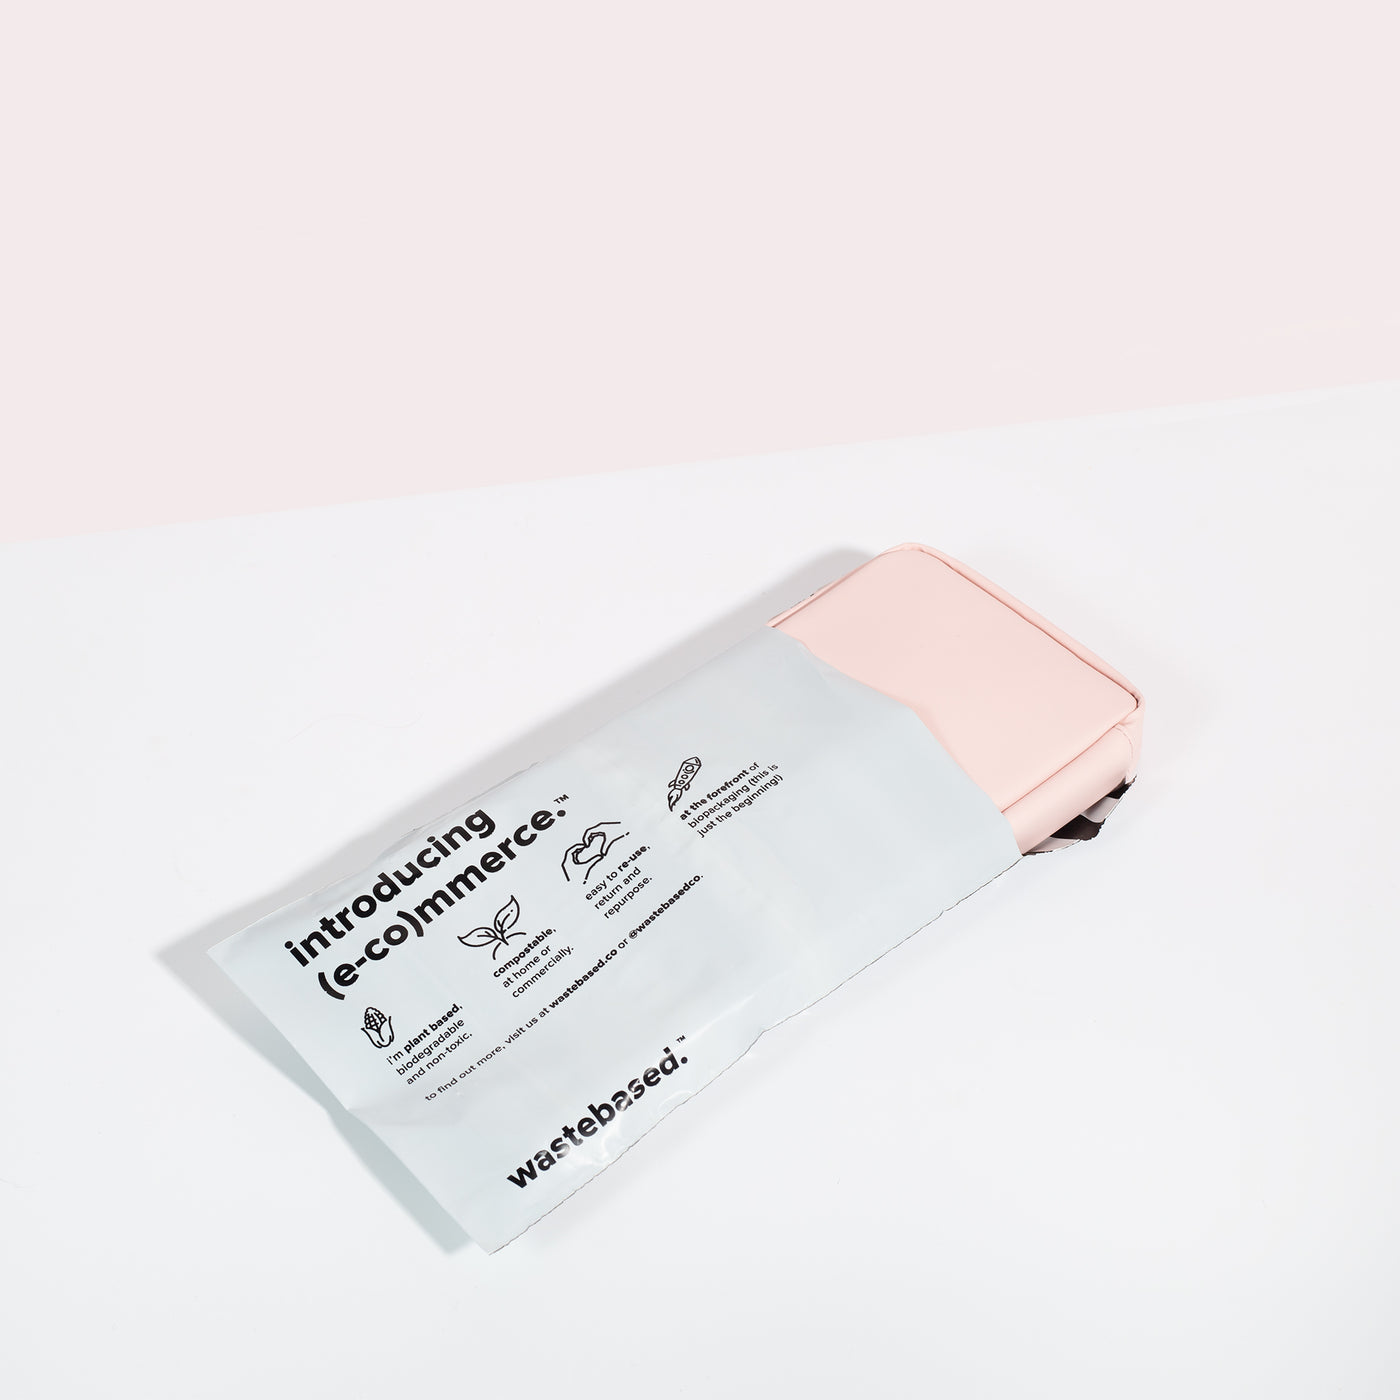 Komodo Pink Eco Essentials Pouch poking out of a 100% biodegradable and compostable Wastebased shipping bag. The pouch and shipping bag are laid flat on a white surface with a pink background.